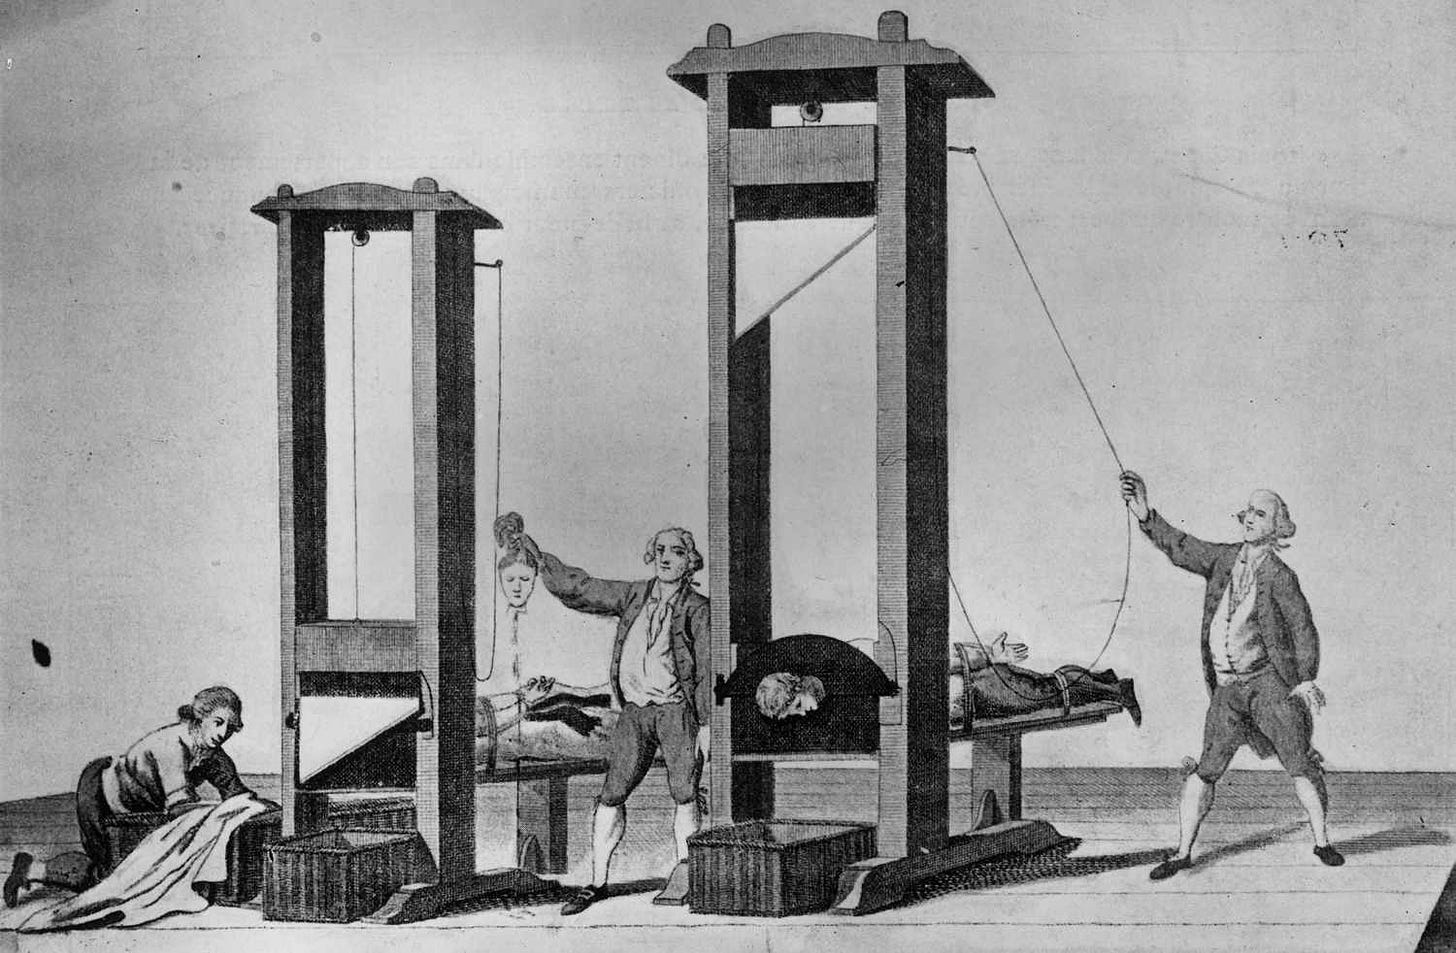 The History of the Guillotine